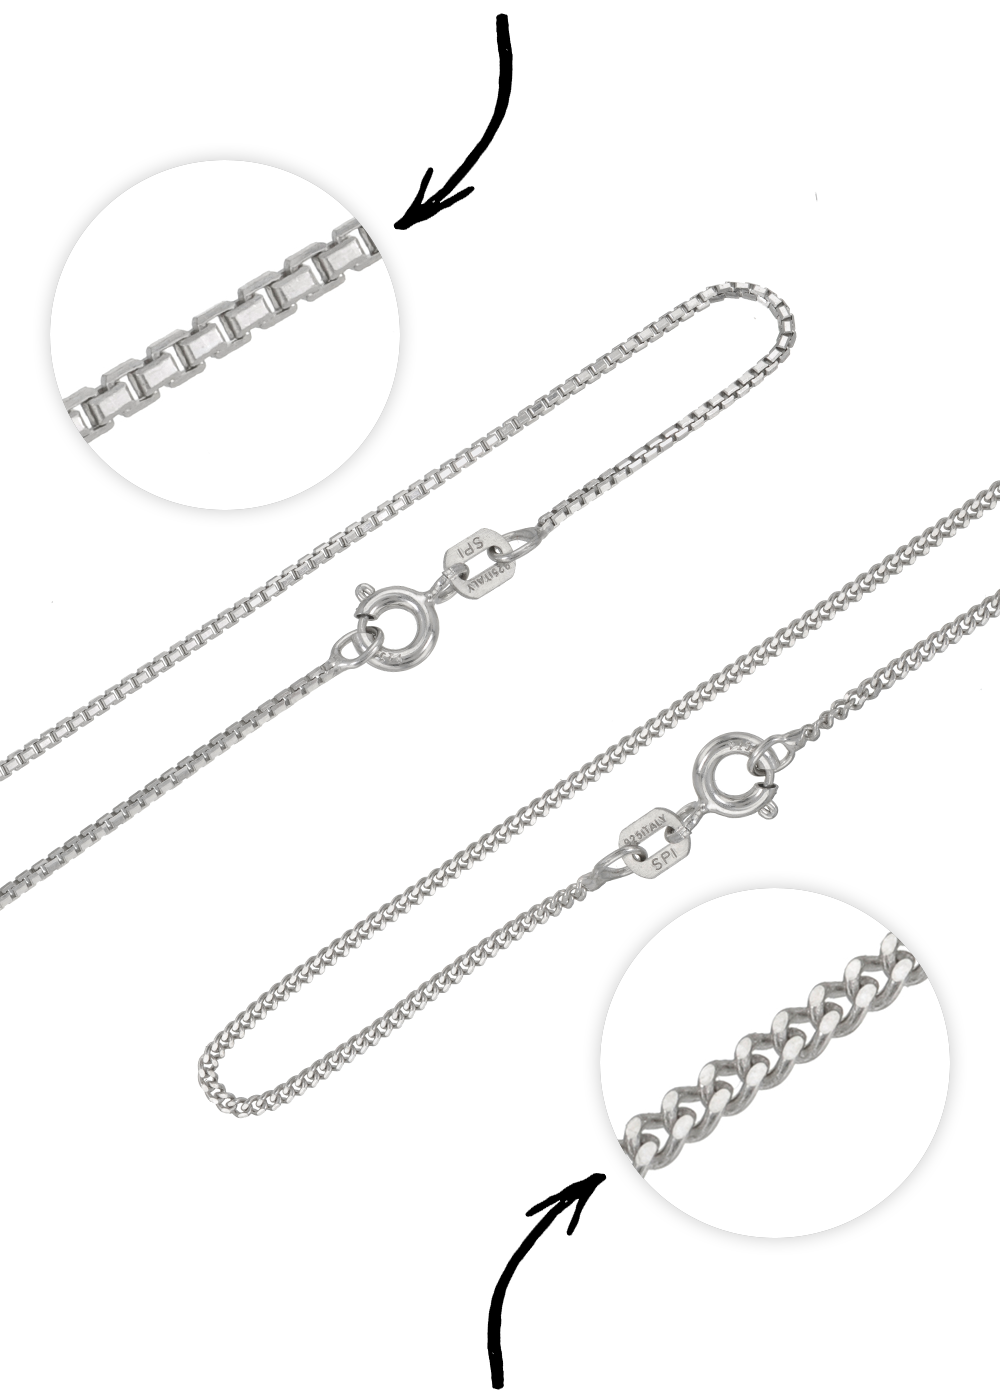 Two styles of sterling silver necklaces